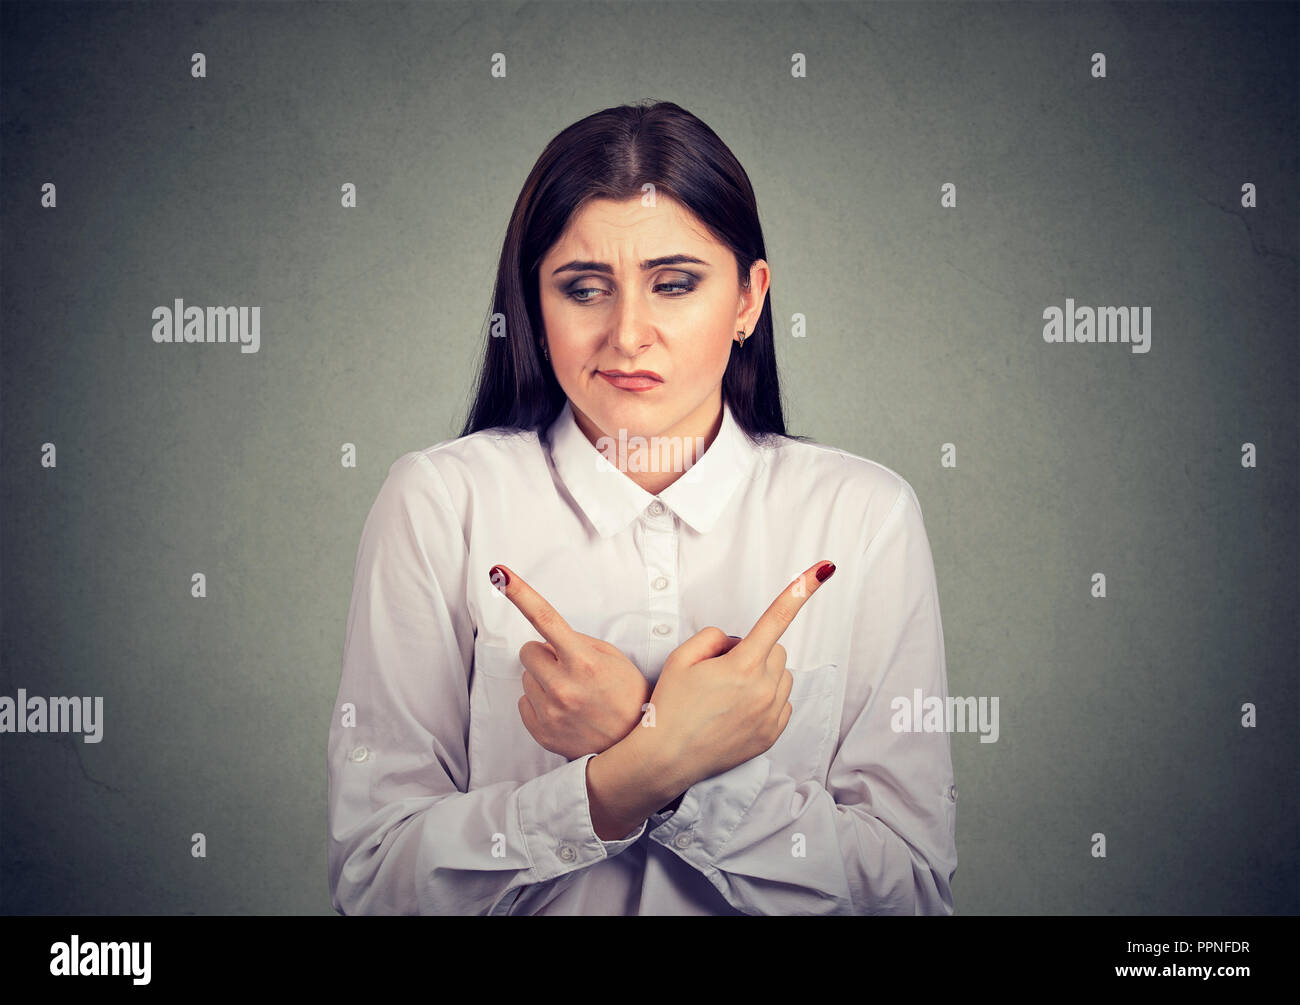 Young uncertain woman looking stressed while pointing with fingers in opposite directions on gray background Stock Photo